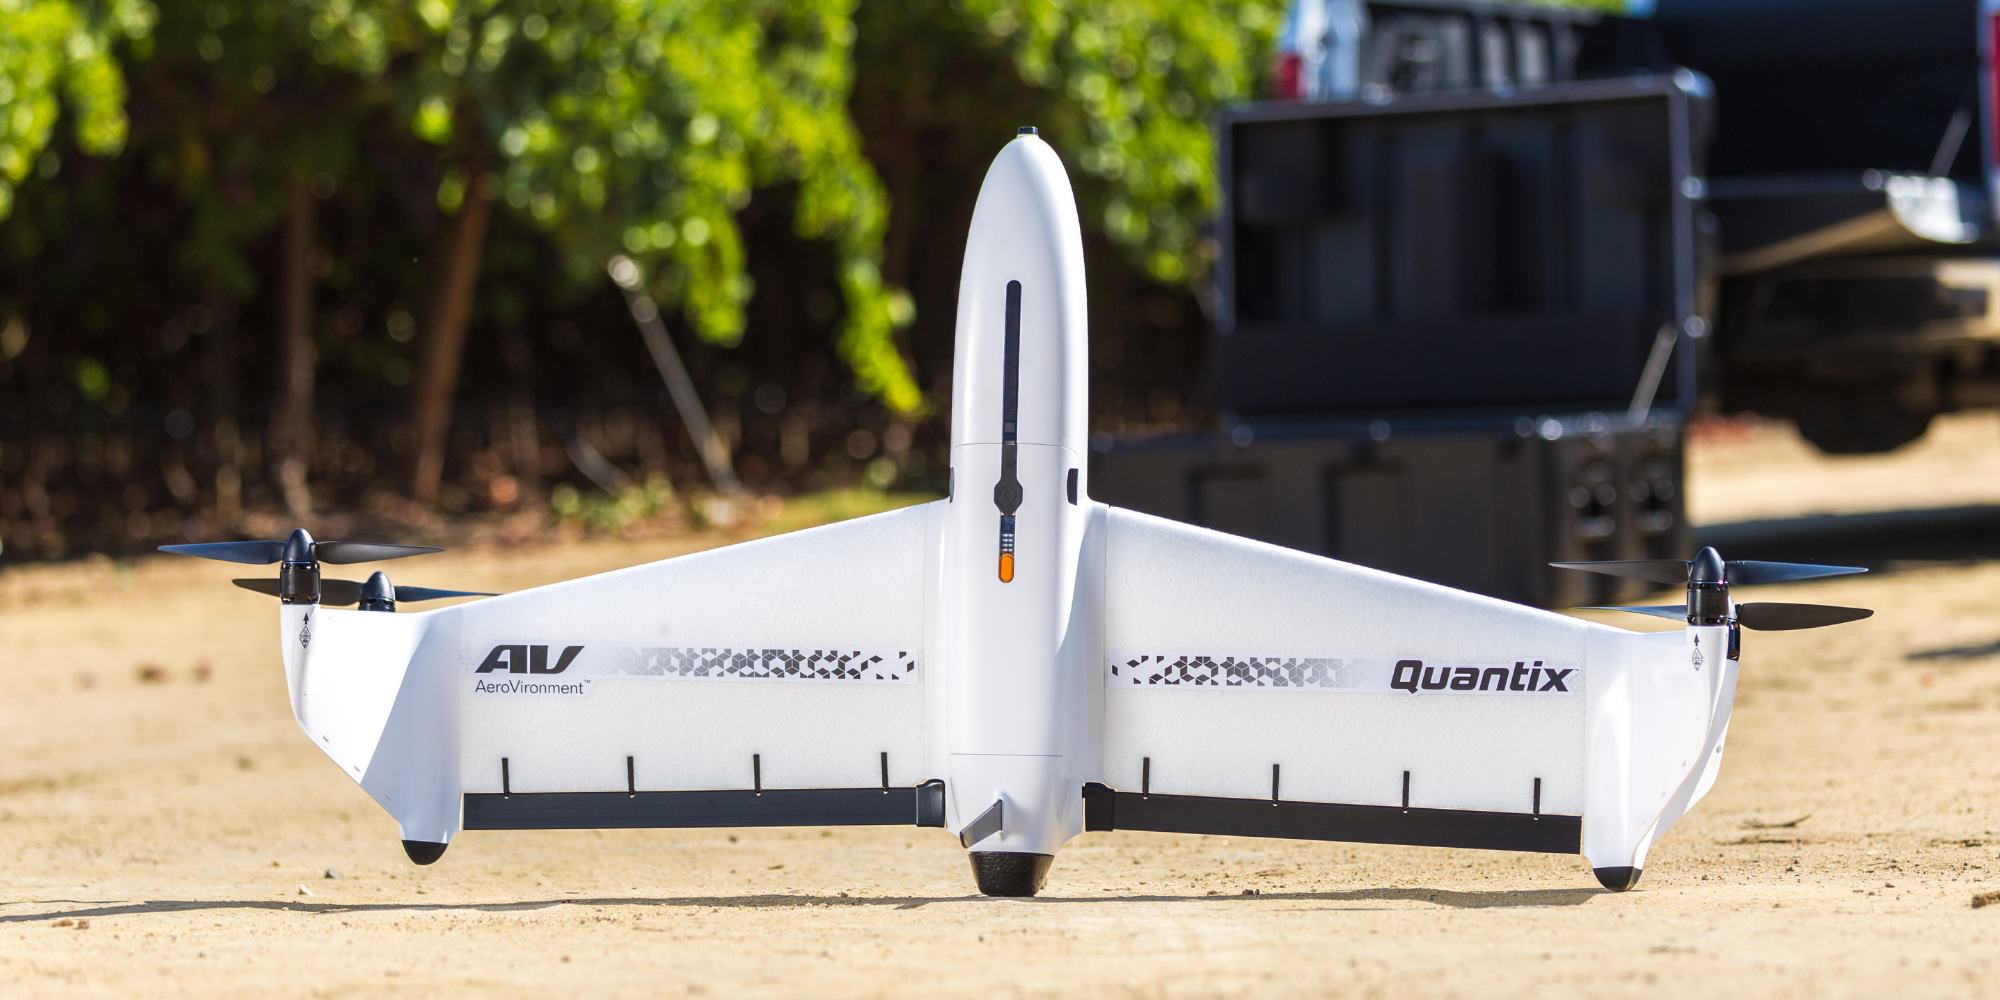 Quantix Recon unmanned aircraft systems from AeroViroment